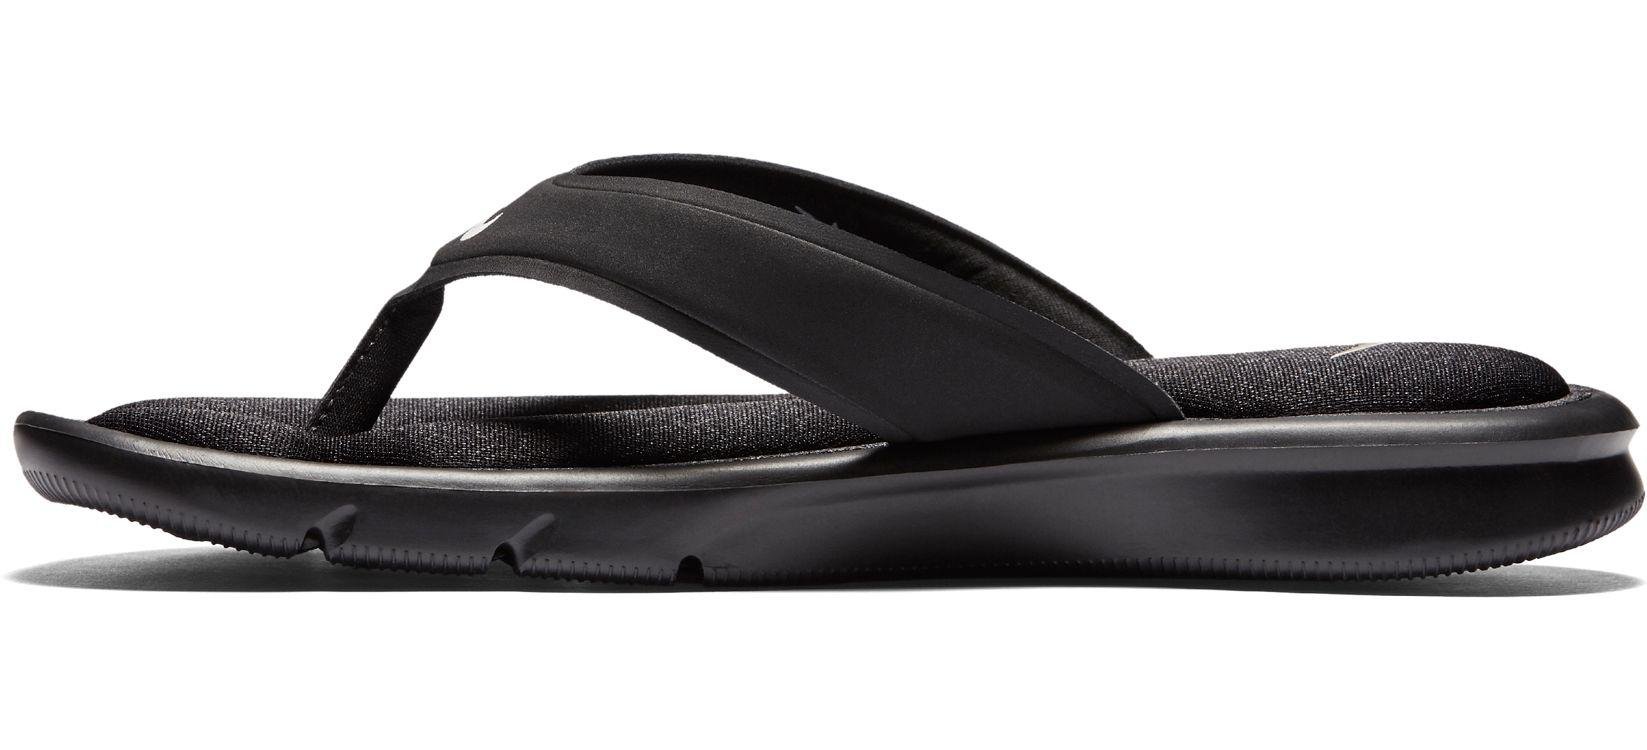 Nike Synthetic Women's Ultra Comfort Thong Flip Flop Sandals From ...